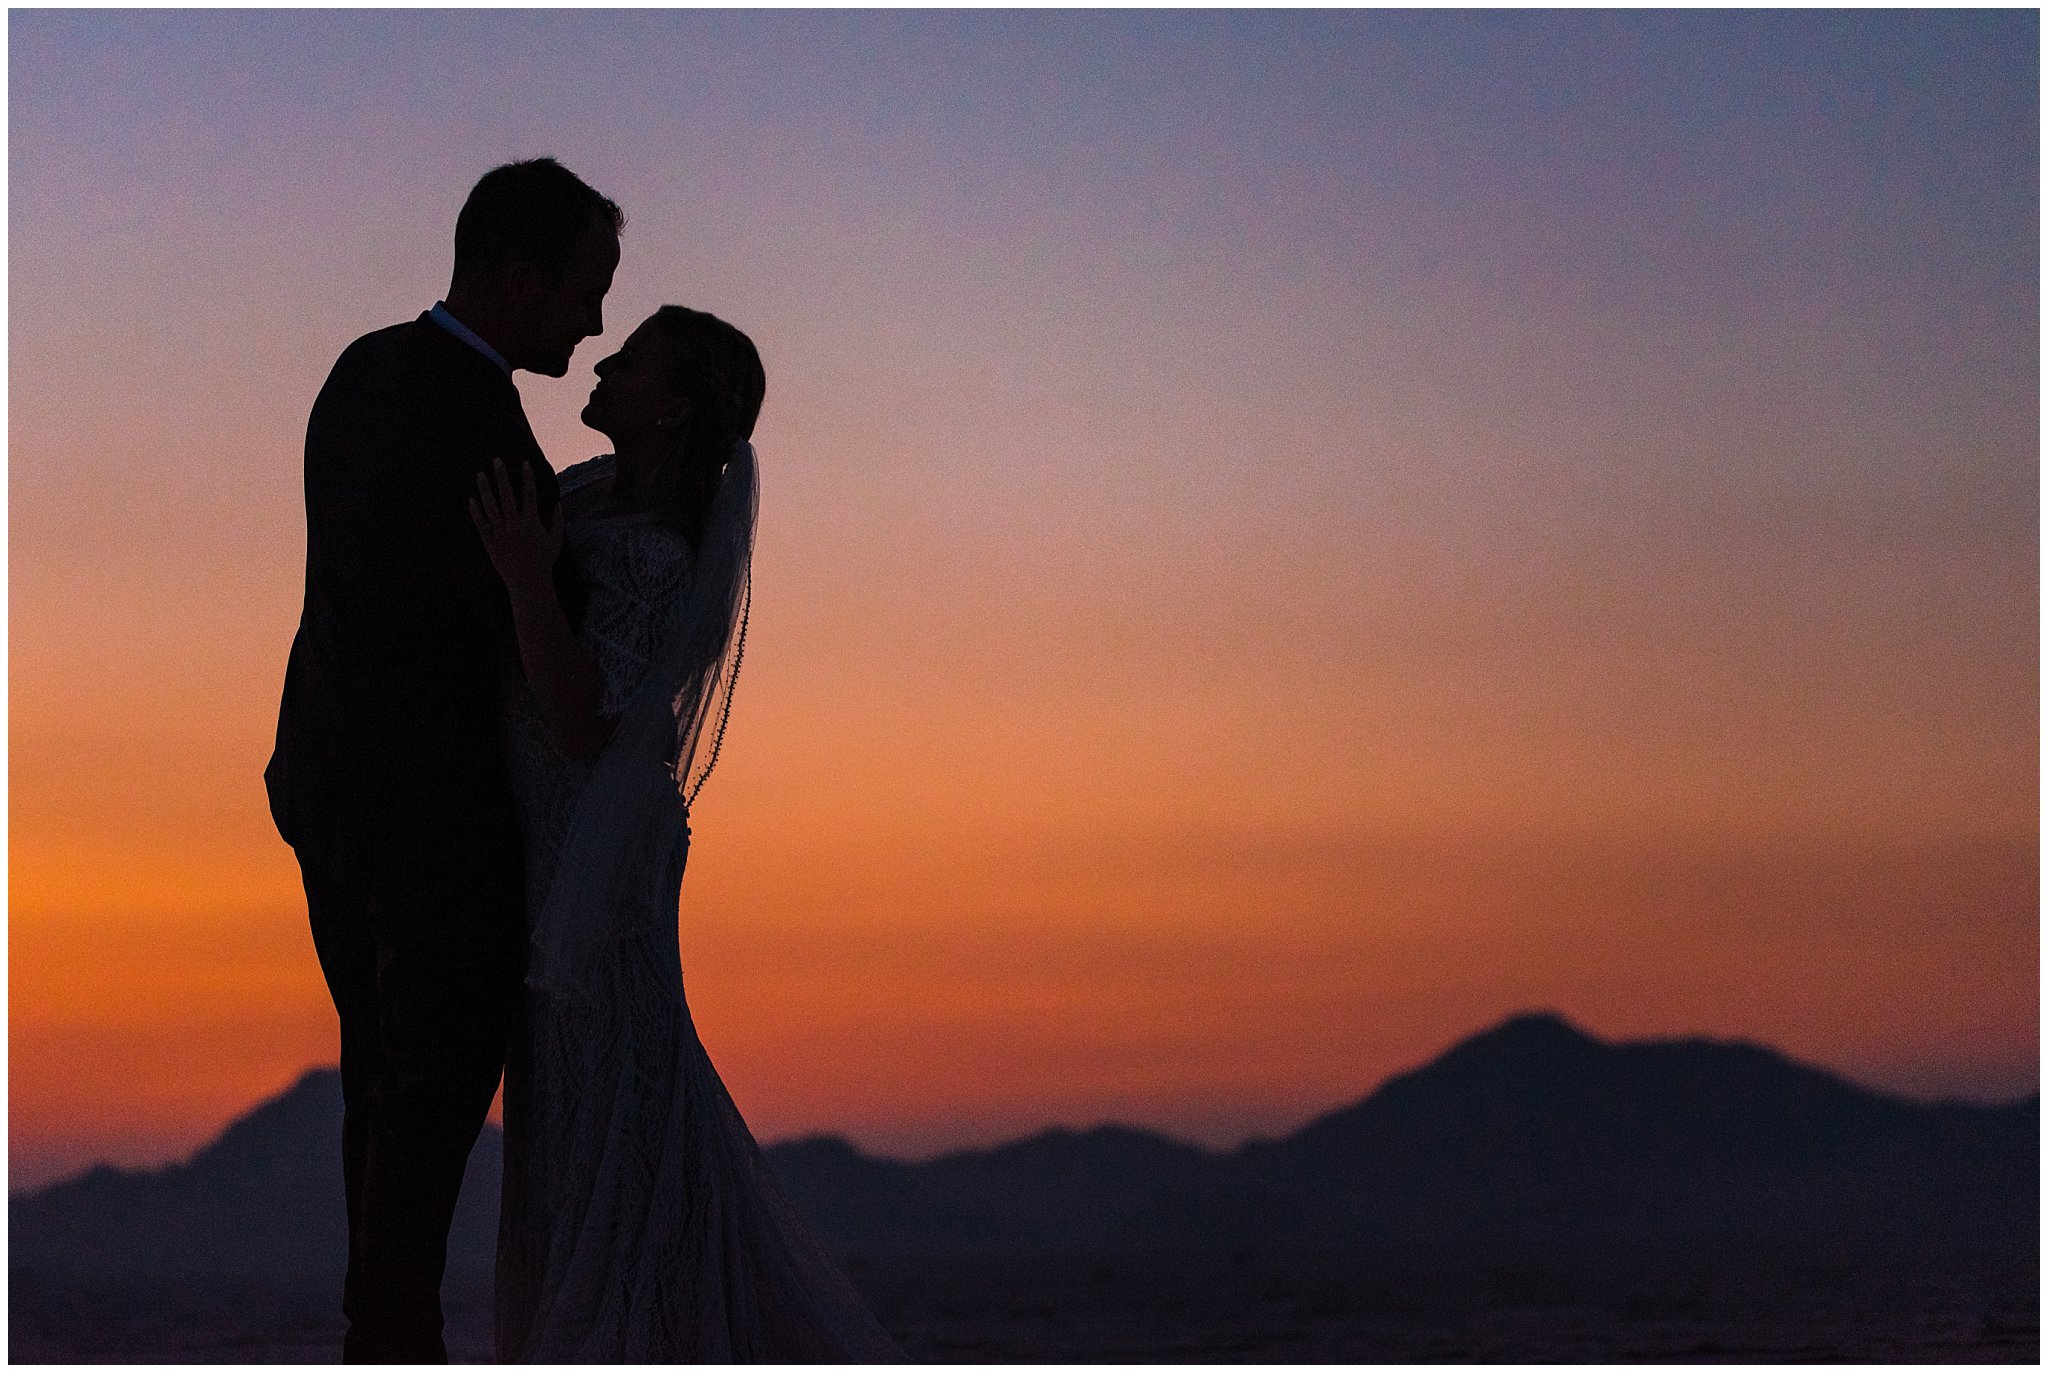 Bride and Groom silhouette at sunset in lace detail dress and blue suit for Adventure Session | Bonneville Salt Flats Sunset Wedding Formal Session | Jessie and Dallin Photography